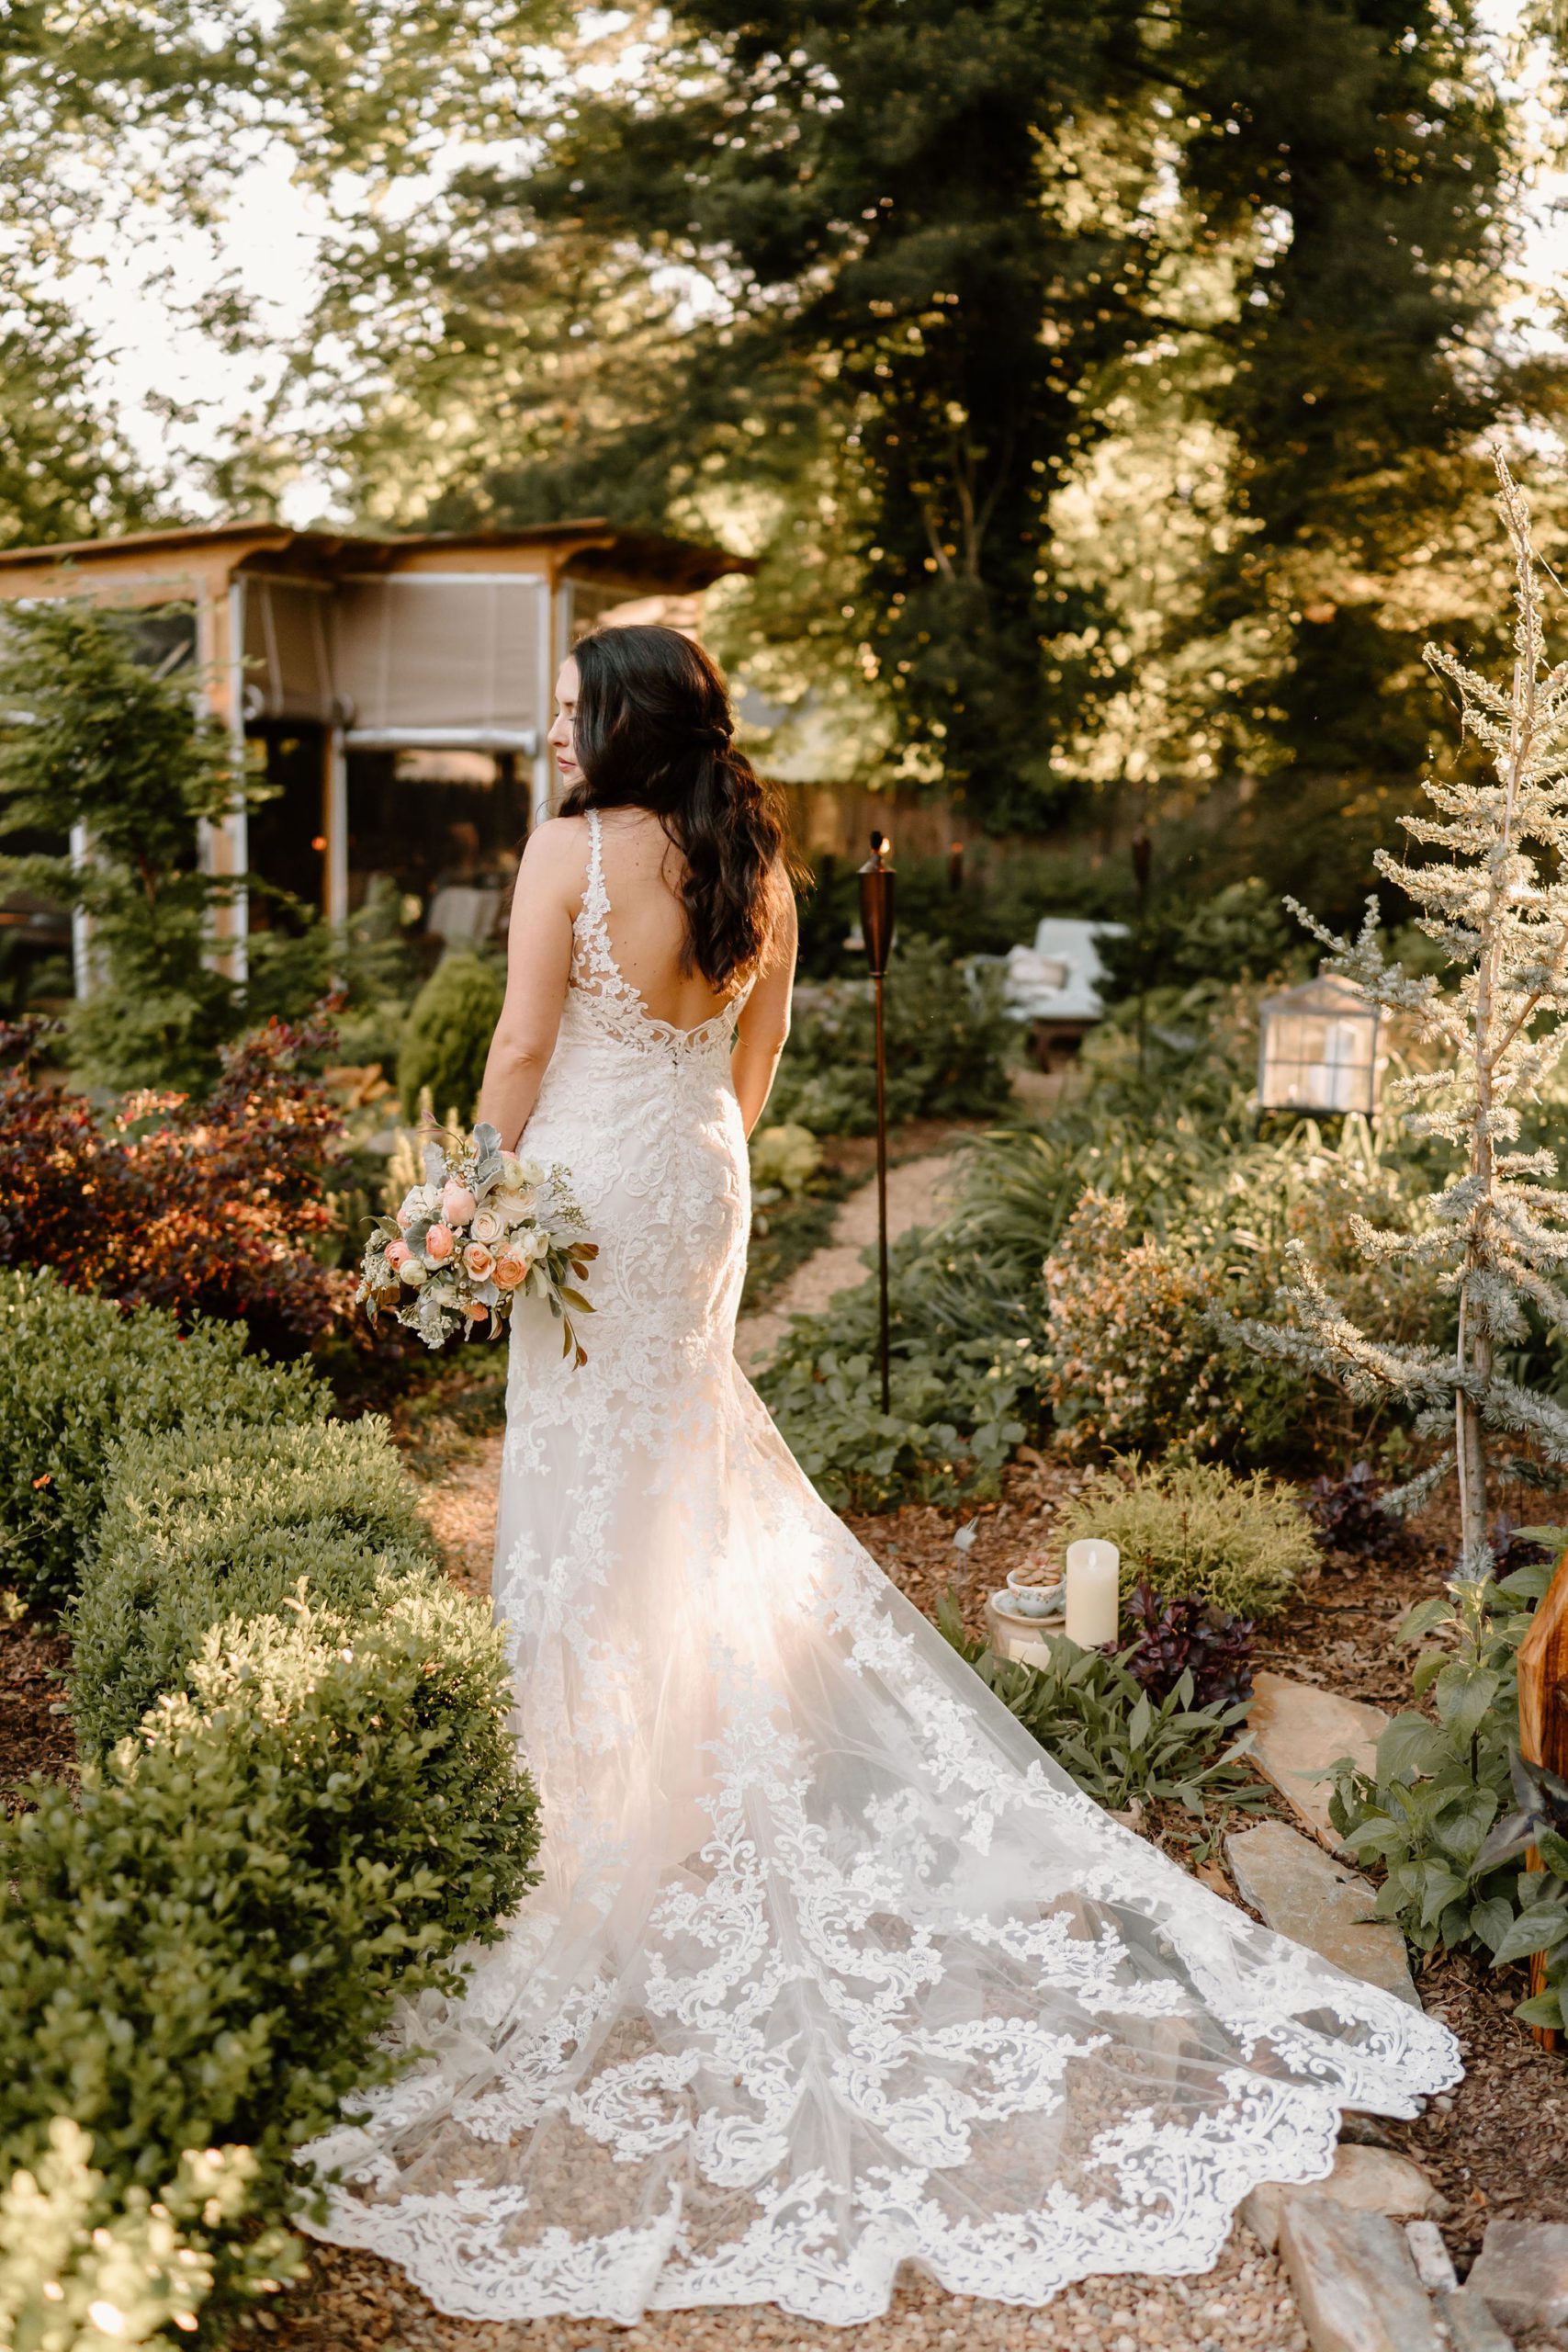 Greensboro bridal photos with gorgeous bride and groom in an intimate outdoor wedding setting
